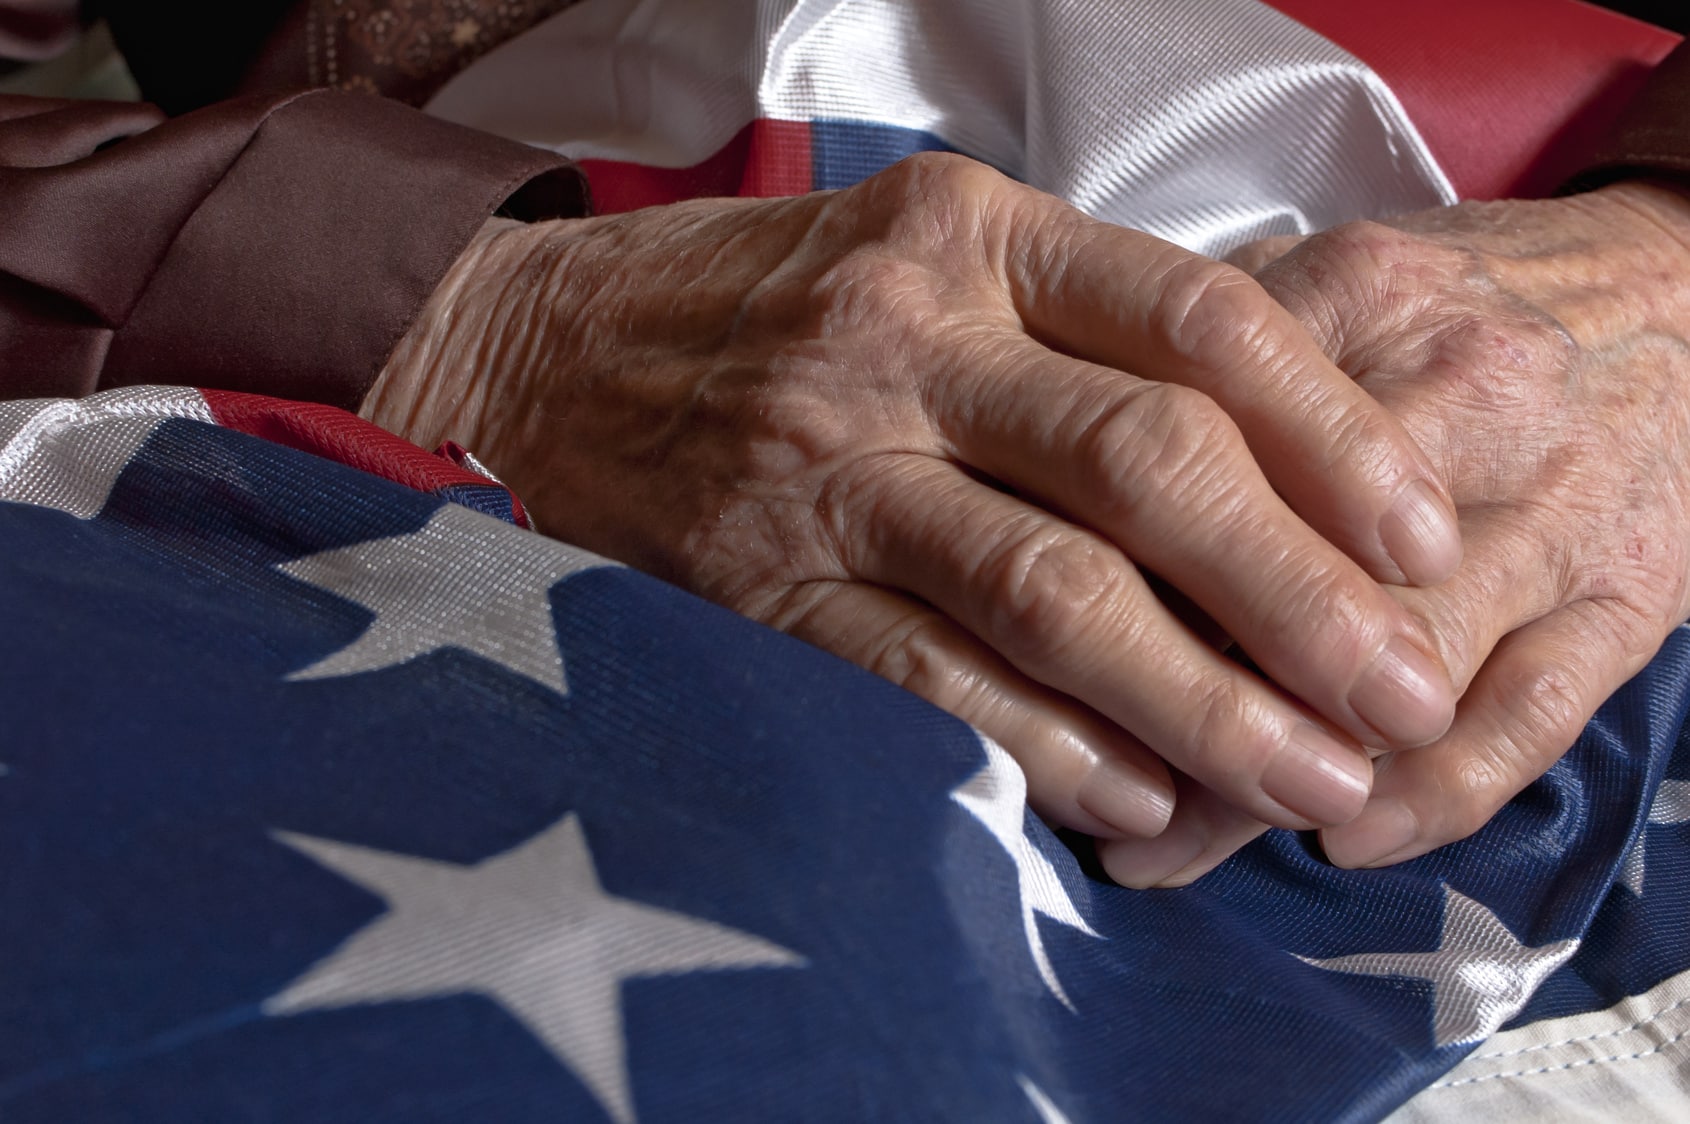 Veteran's Day on 11/11 celebrates and honors our United States military veterans.